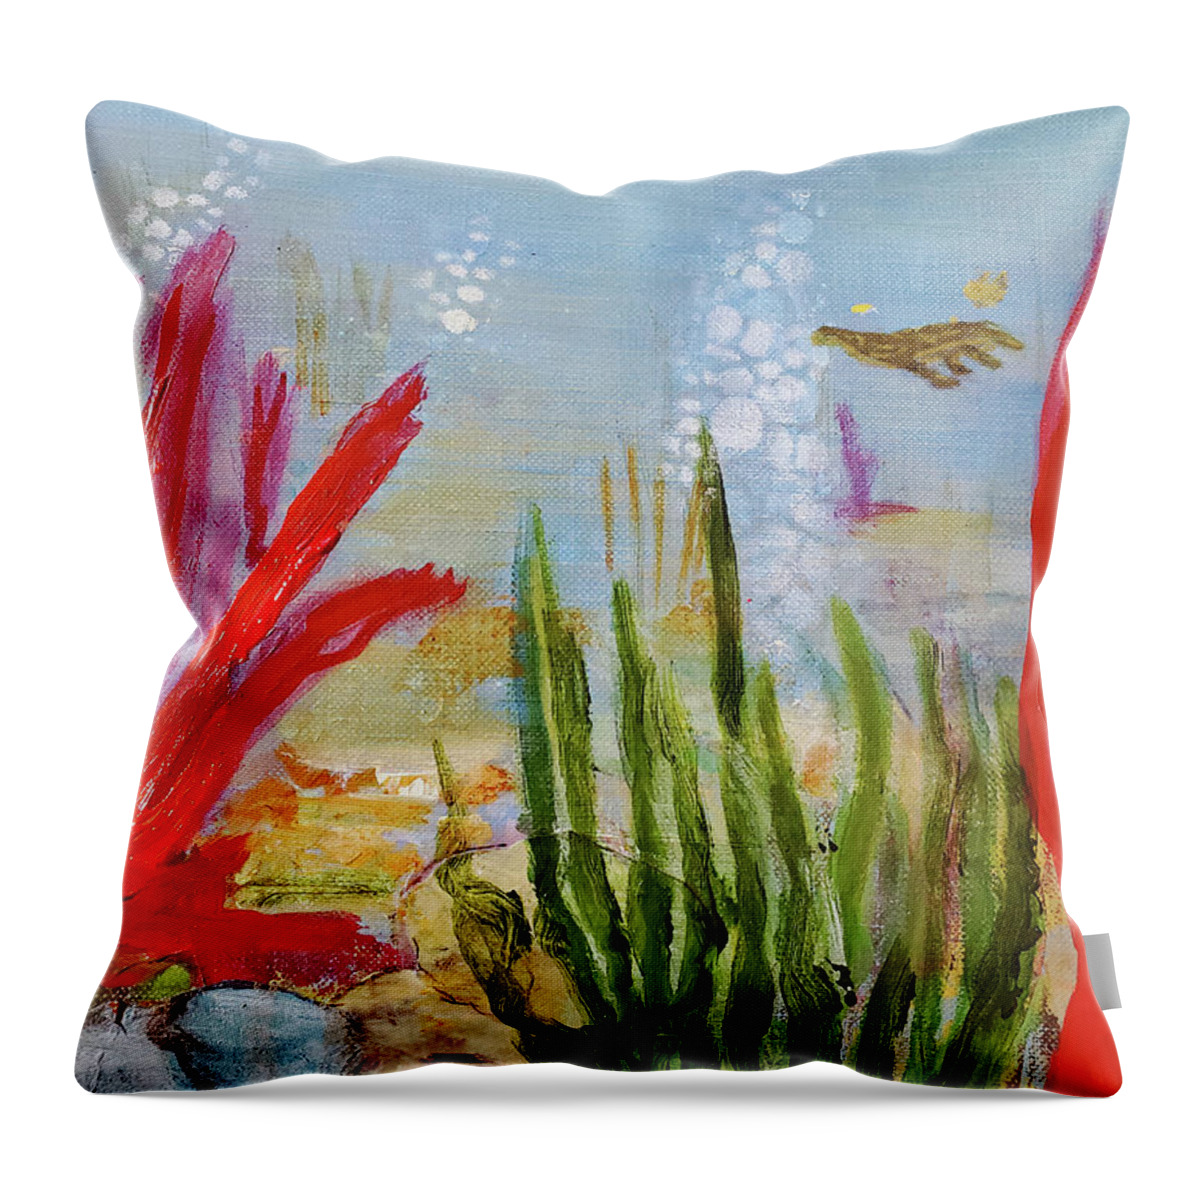 Landscape Throw Pillow featuring the painting Underwater World by Sharon Williams Eng